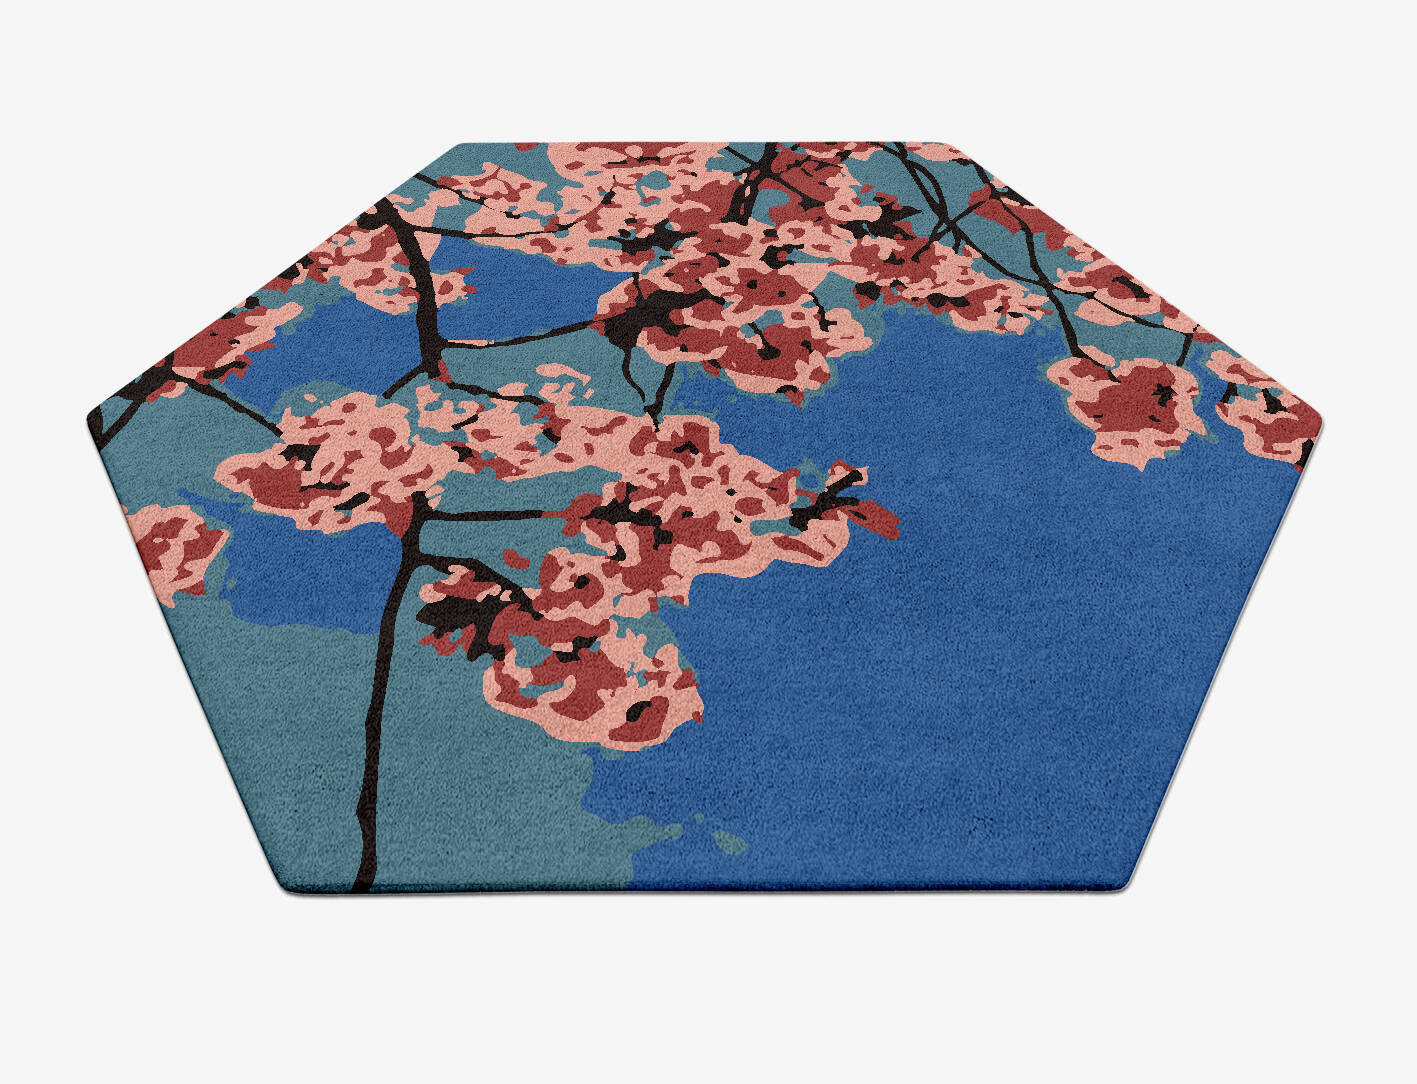 Bougainvillea Floral Hexagon Hand Tufted Pure Wool Custom Rug by Rug Artisan